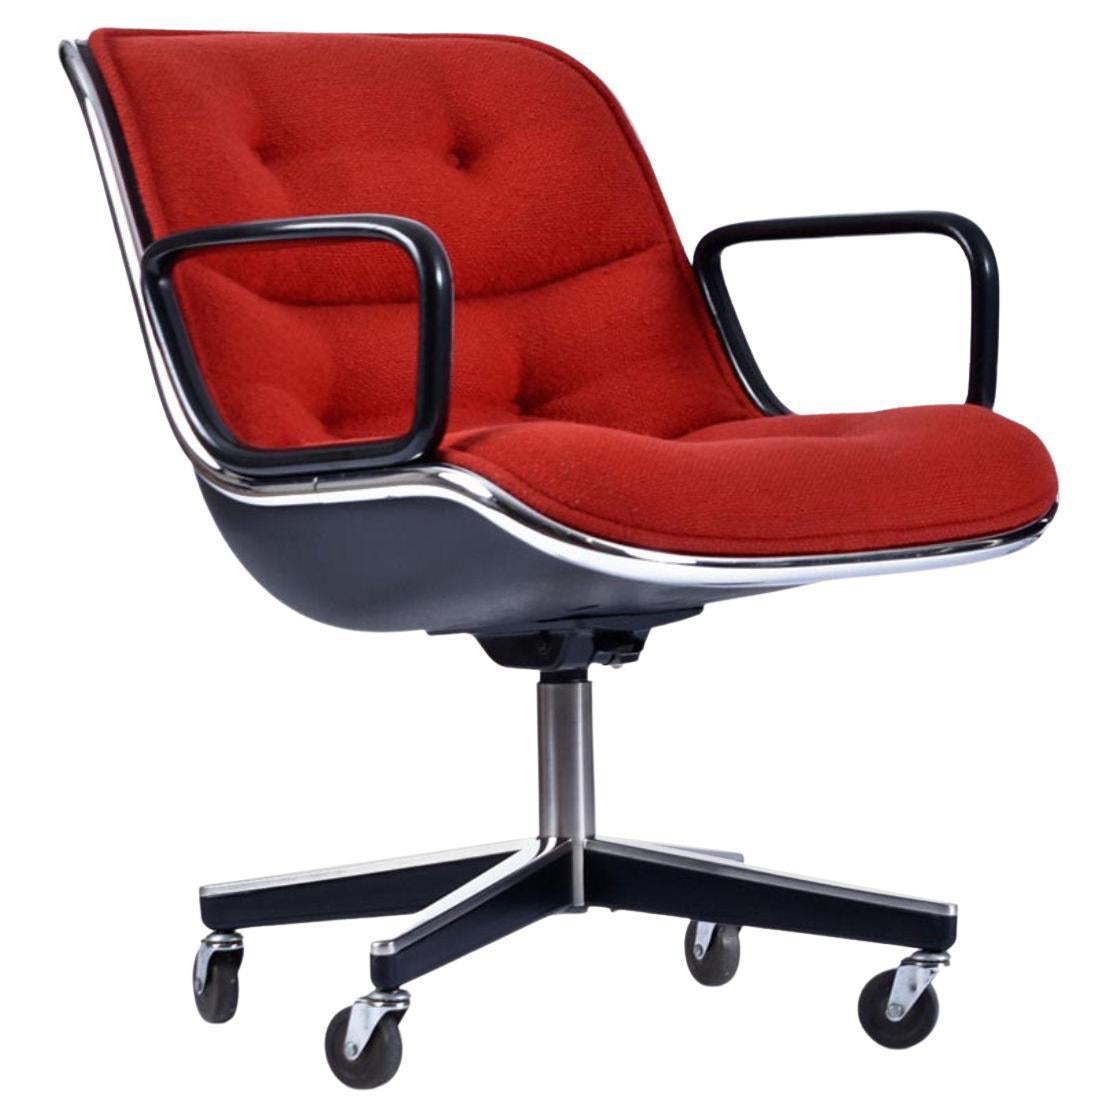 Charles Pollock for Knoll Red Tweed Executive Chair with Height Tension Knob